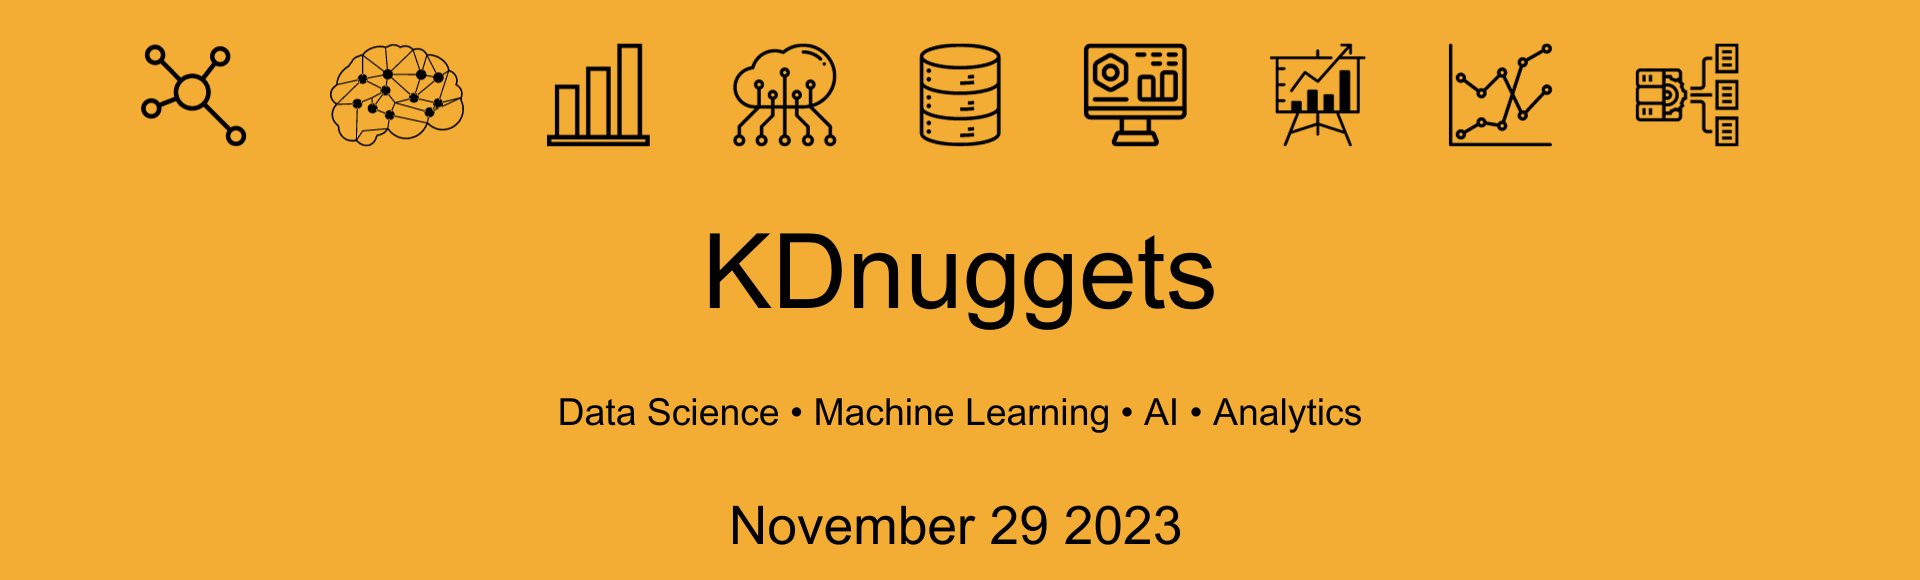 Visit KDnuggets for more Data Science, Machine Learning, AI & Analytics, including: 